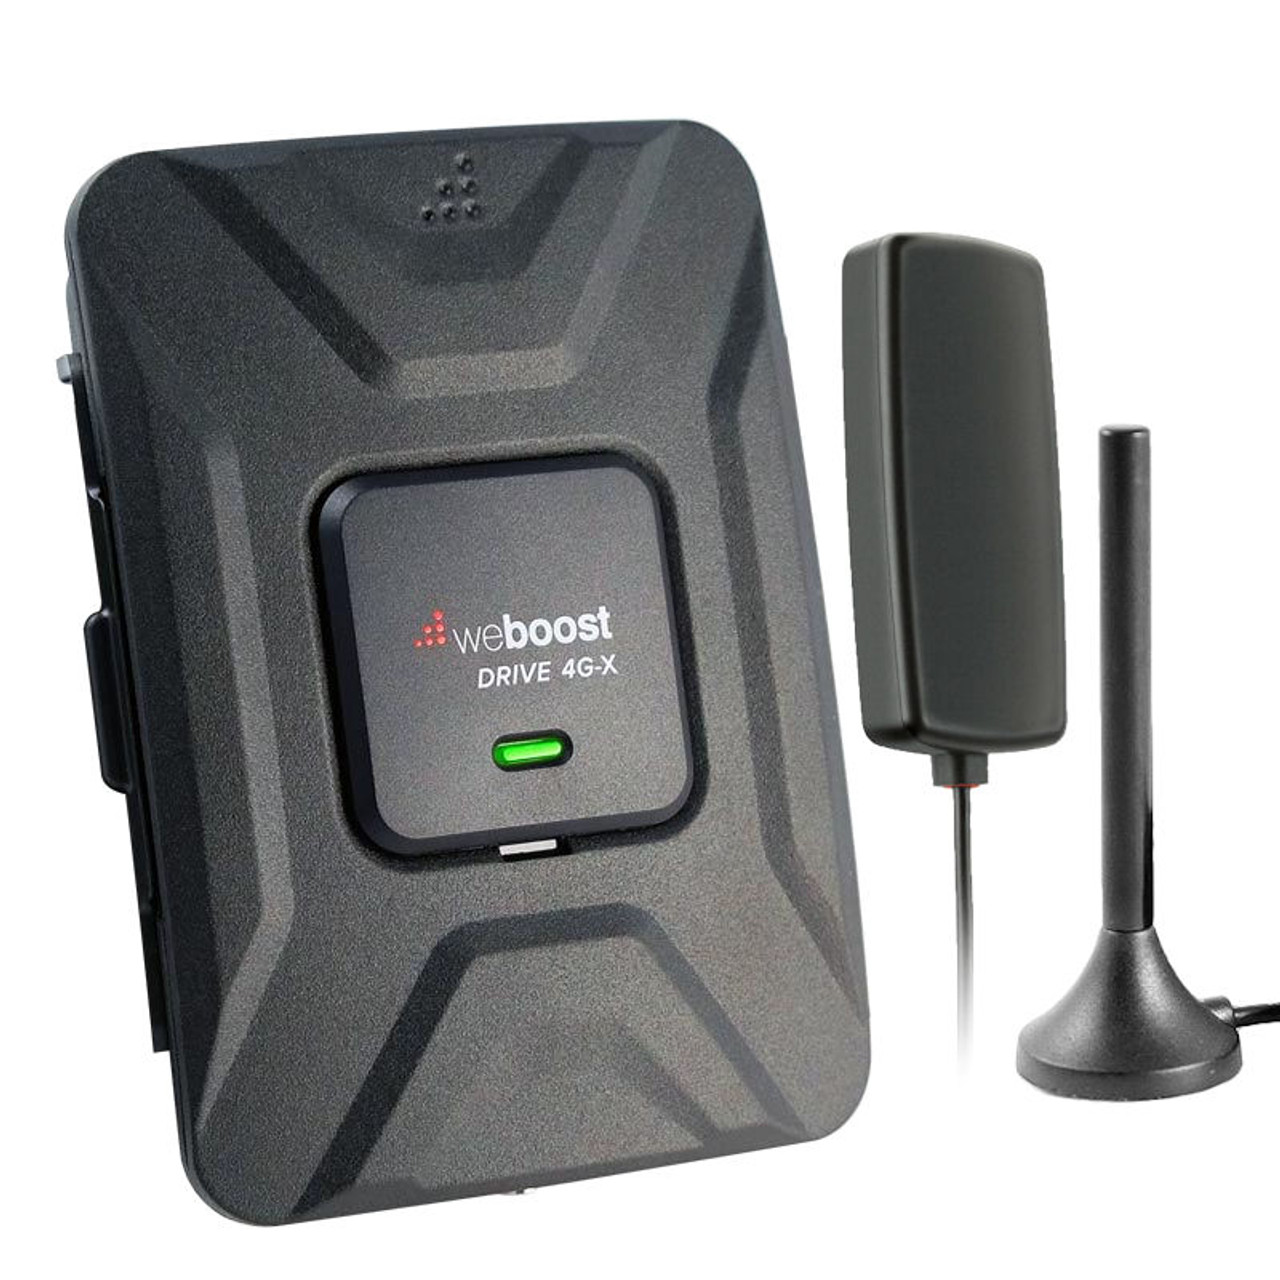 boost cell phone signal